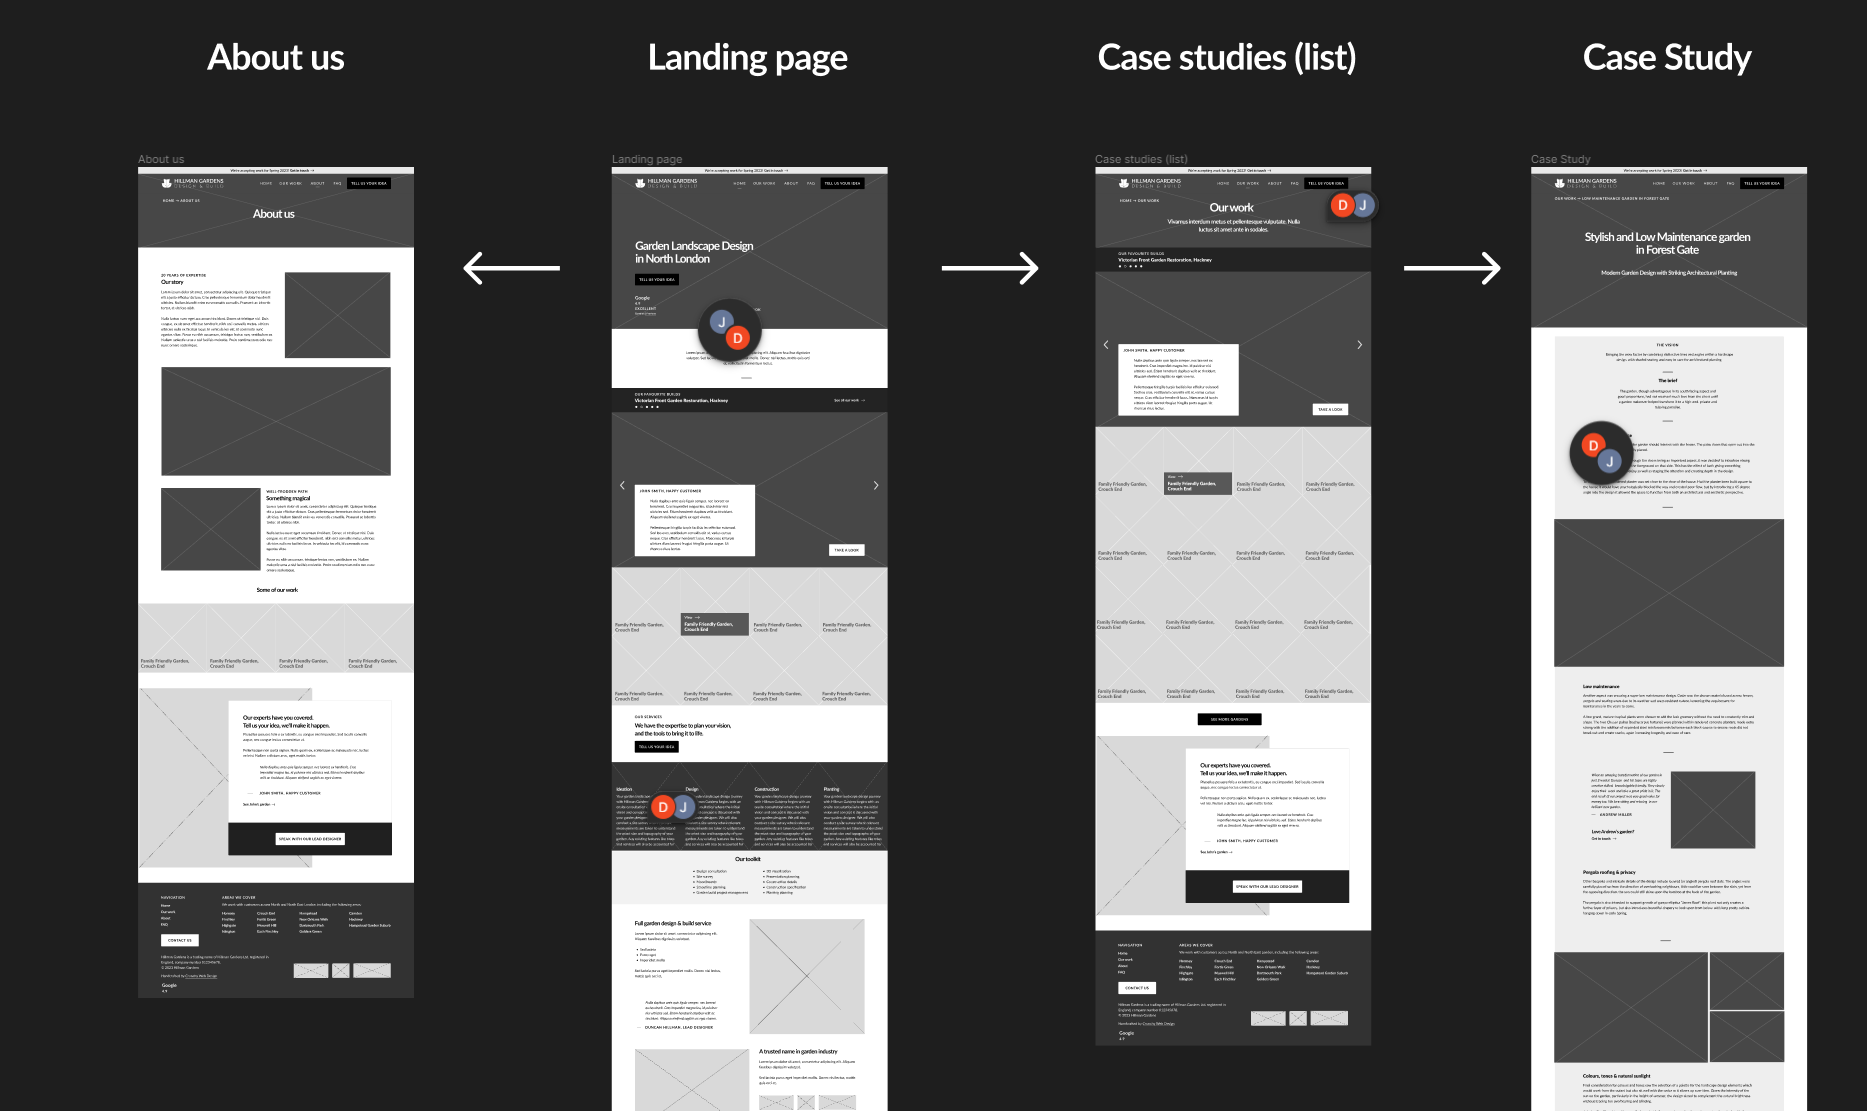 A screenshot of the Figma layout for the wireframe